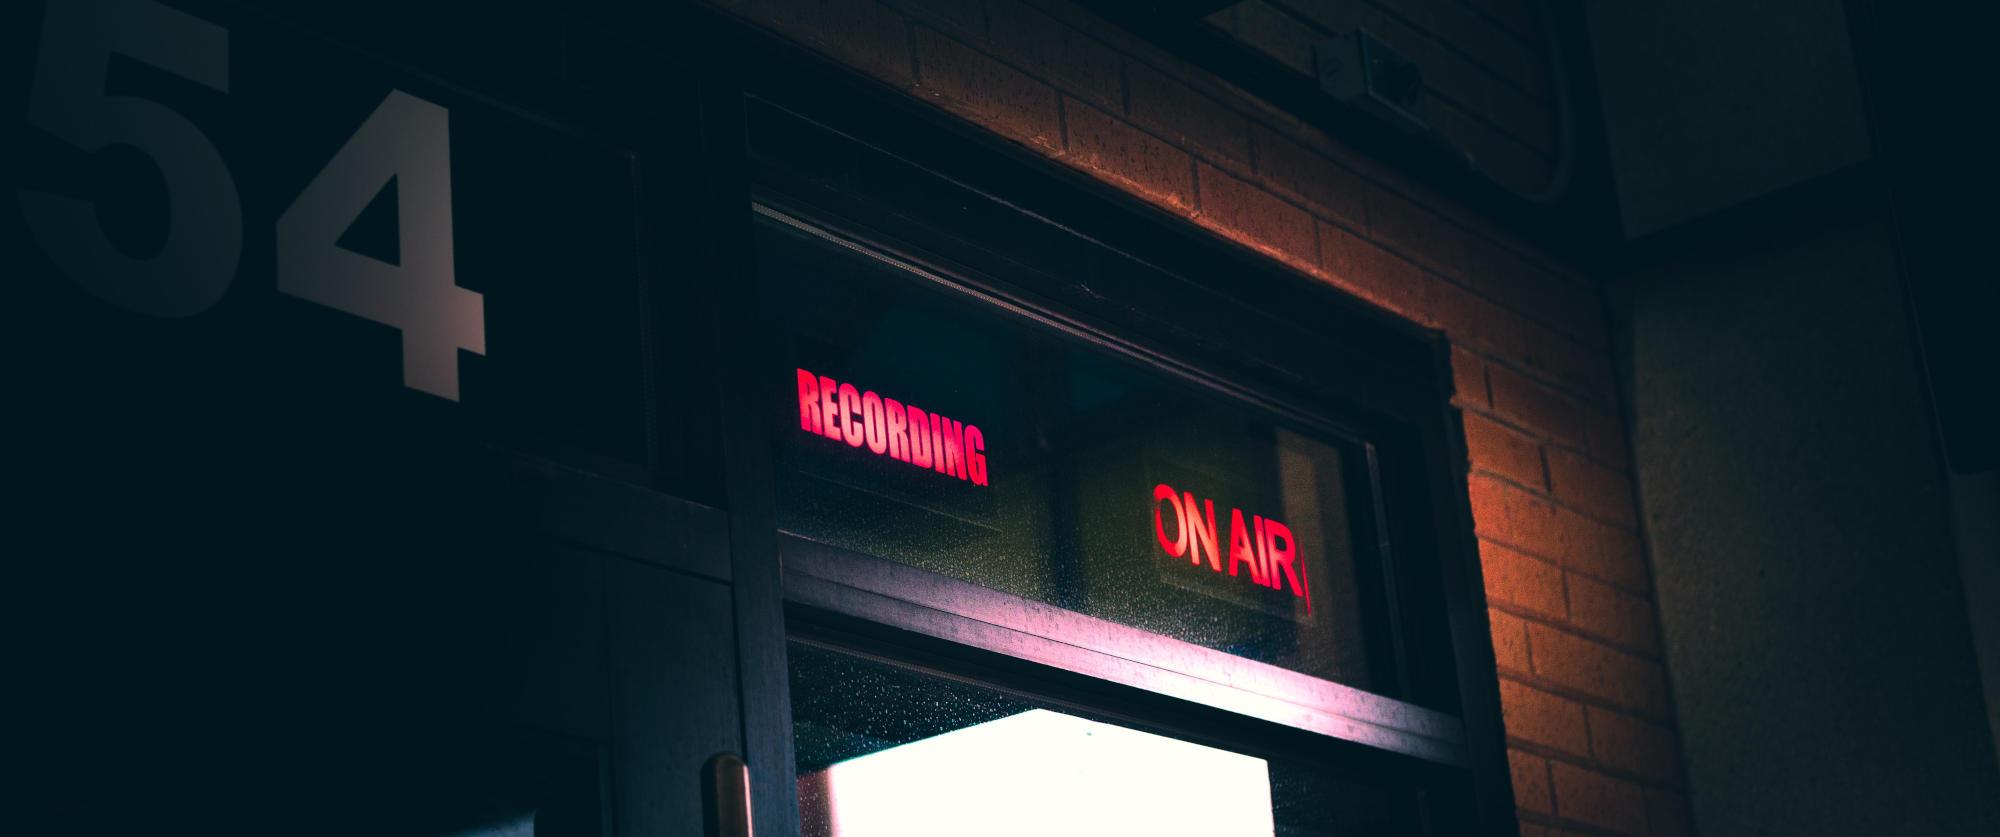 On air sign at a recording studio